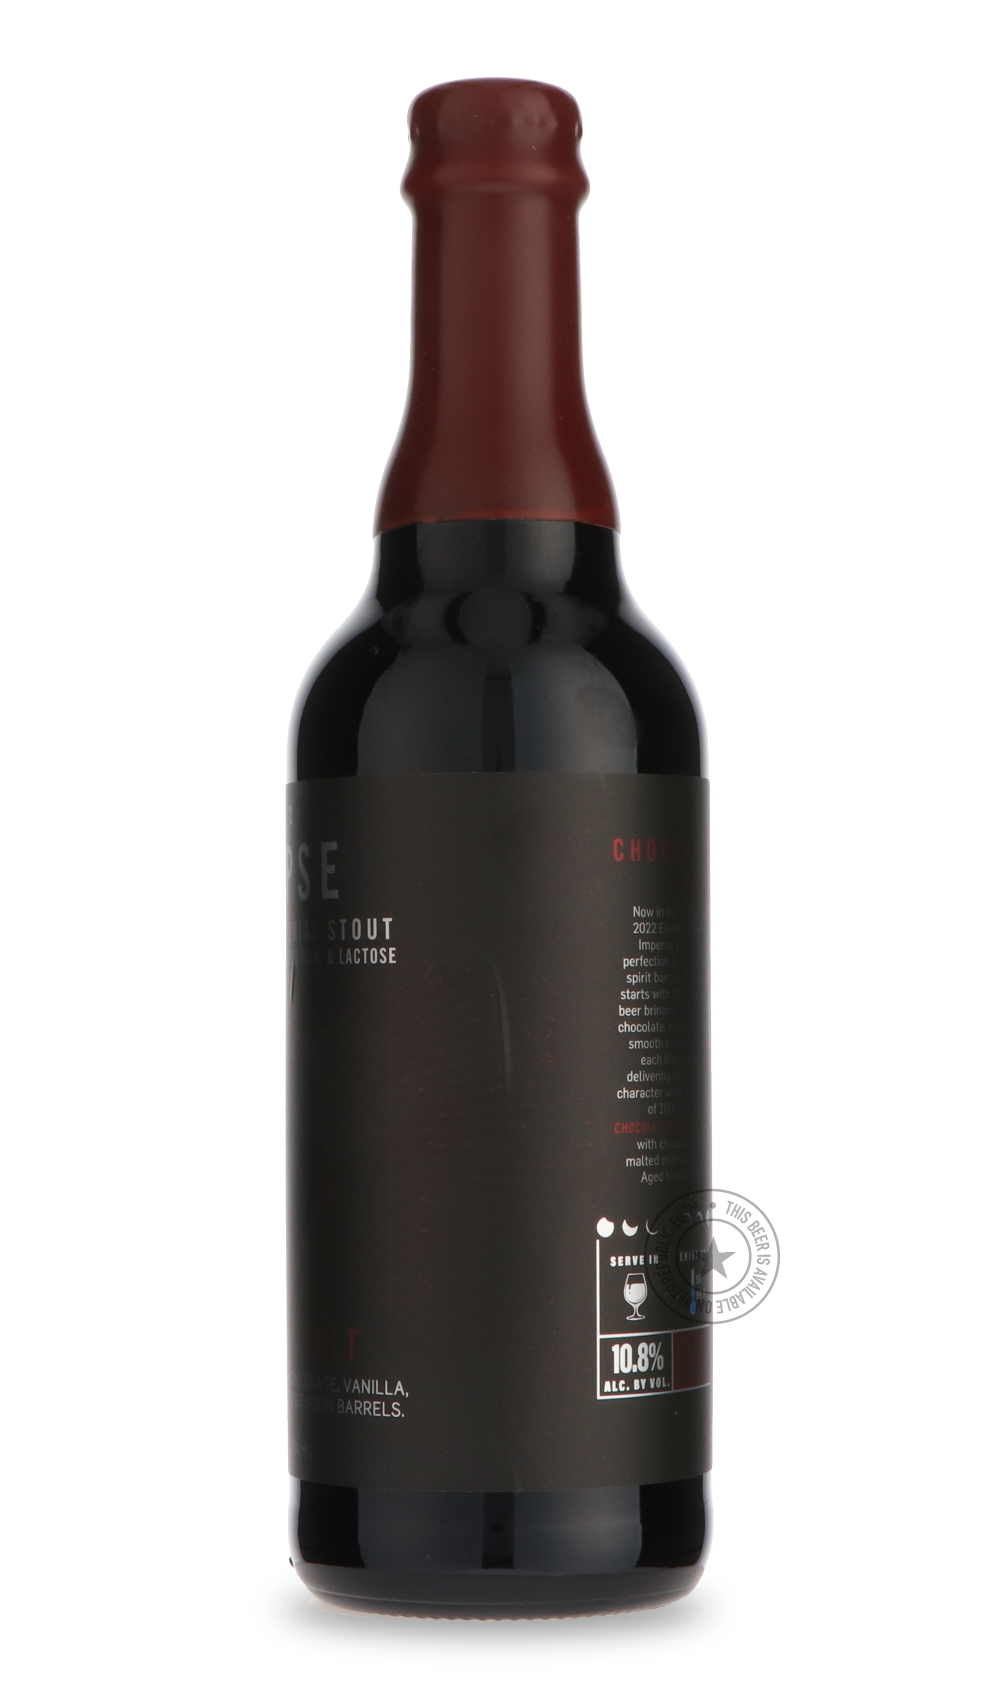 -FiftyFifty- Eclipse - Chocolate Malt (2022)-Stout & Porter- Only @ Beer Republic - The best online beer store for American & Canadian craft beer - Buy beer online from the USA and Canada - Bier online kopen - Amerikaans bier kopen - Craft beer store - Craft beer kopen - Amerikanisch bier kaufen - Bier online kaufen - Acheter biere online - IPA - Stout - Porter - New England IPA - Hazy IPA - Imperial Stout - Barrel Aged - Barrel Aged Imperial Stout - Brown - Dark beer - Blond - Blonde - Pilsner - Lager - Wh